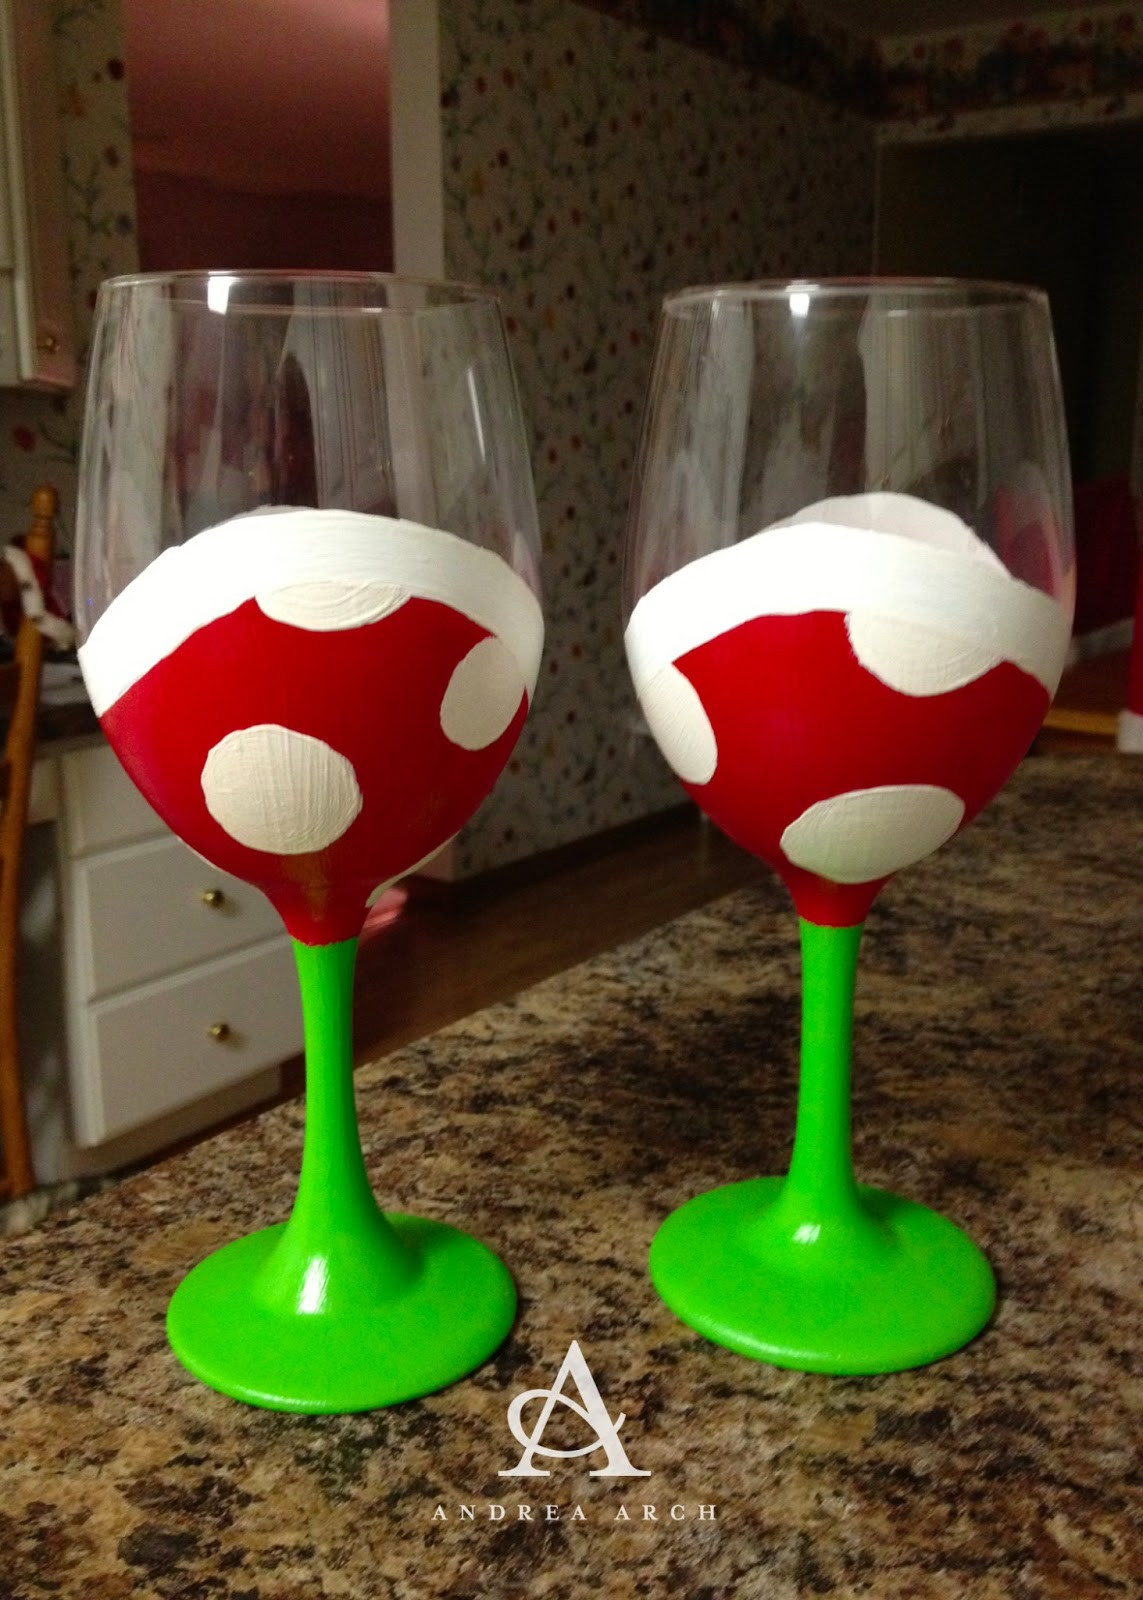 Best ideas about DIY Wine Glass
. Save or Pin Andrea Arch DIY Mario Piranha Plant Wine Glasses Now.